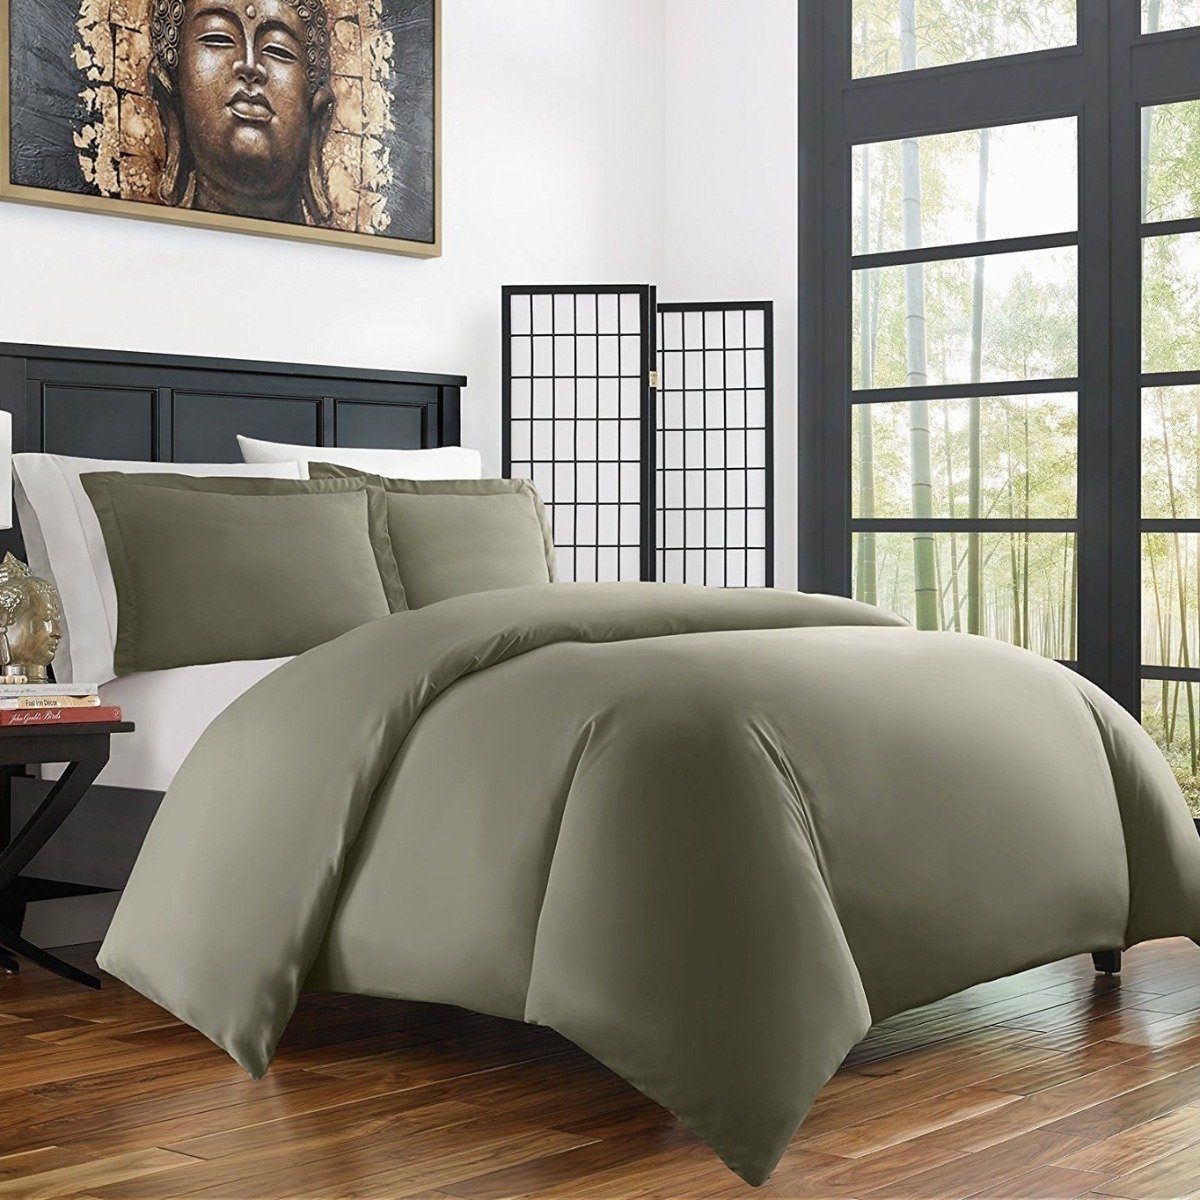 Bamboo Duvet Cover Set - Hypoallergenic - Assorted Sizes and Colors / Olive / Twin/Twin XL